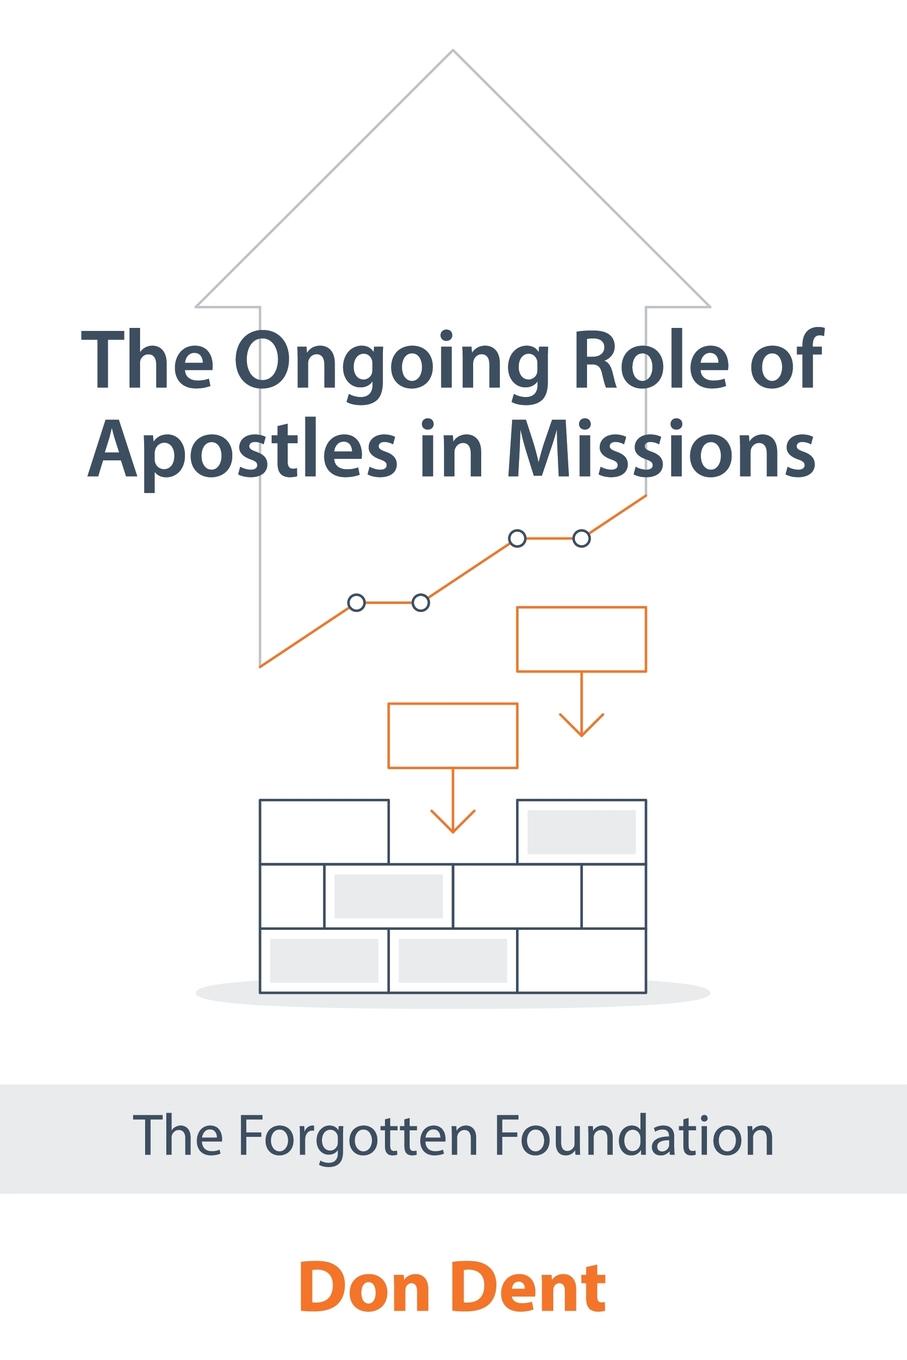 The Ongoing Role of Apostles in Missions. The Forgotten Foundation